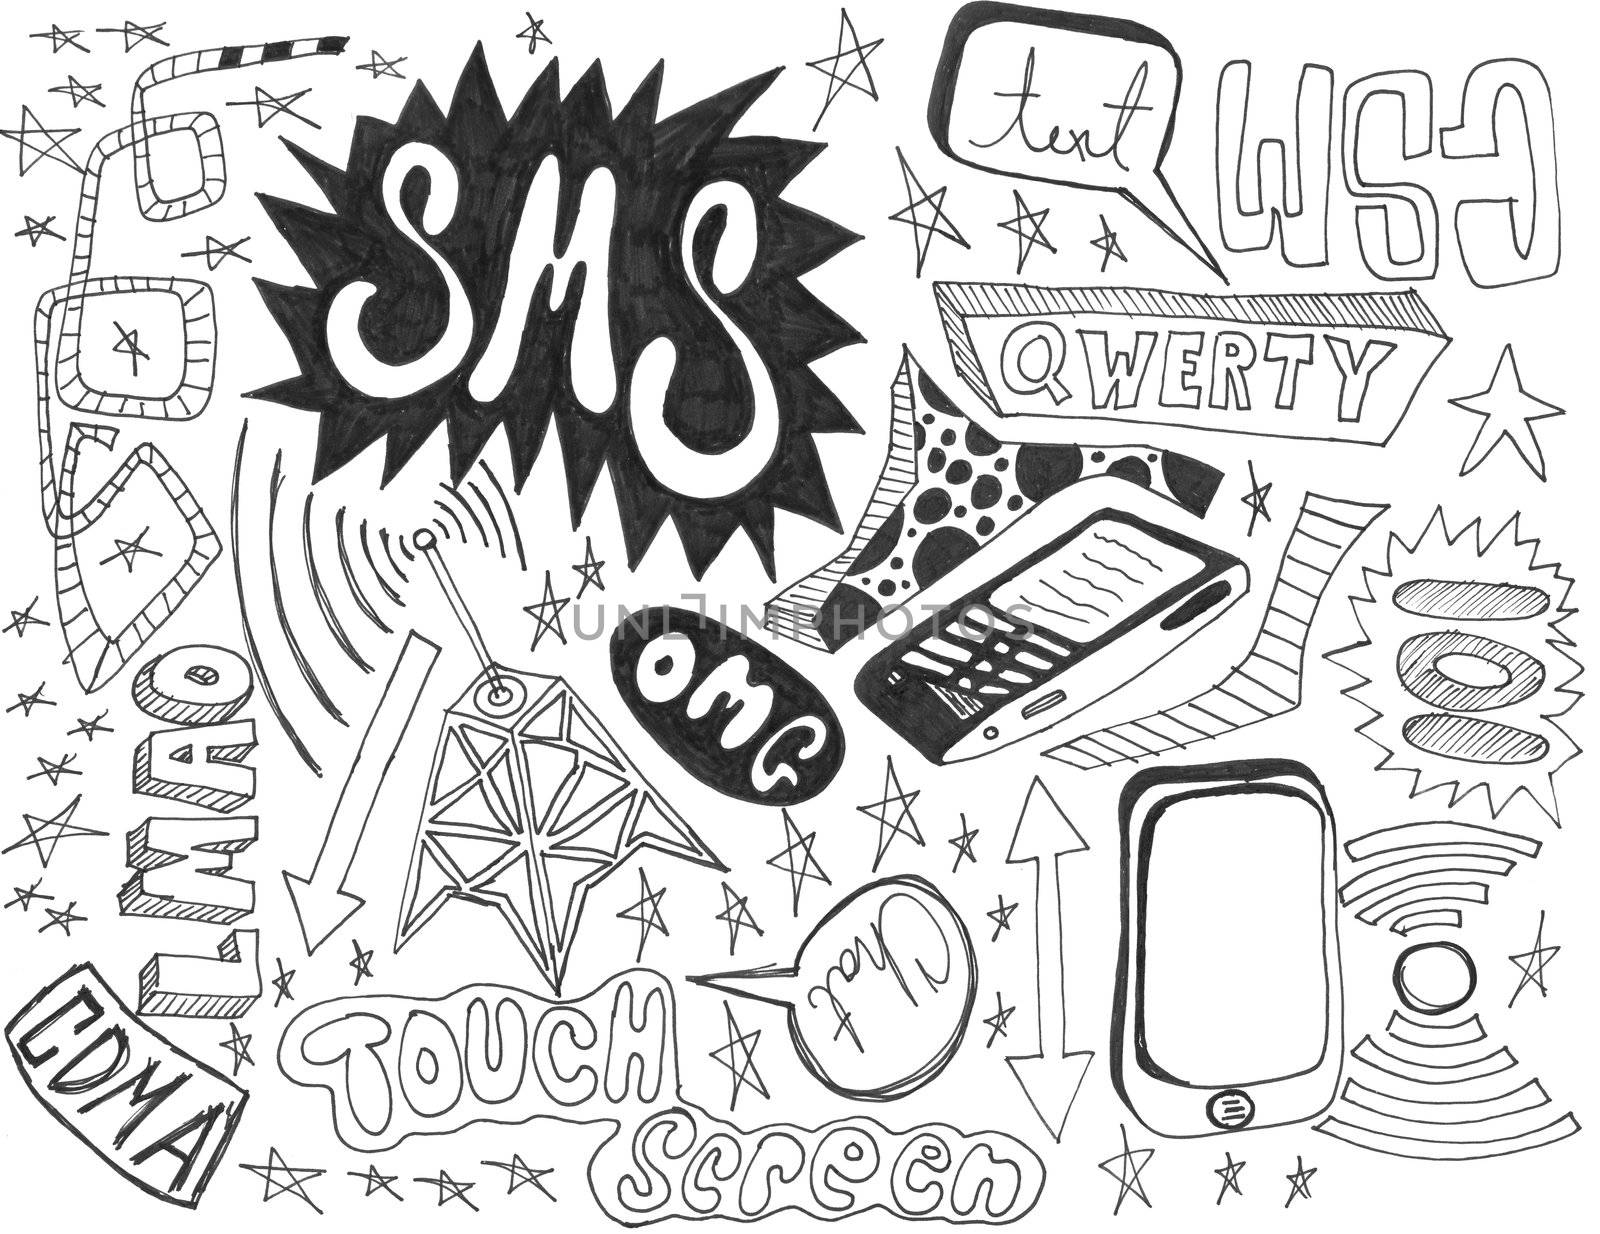 hand drawn doodles design elements scetch scribbles drawing by jeremywhat